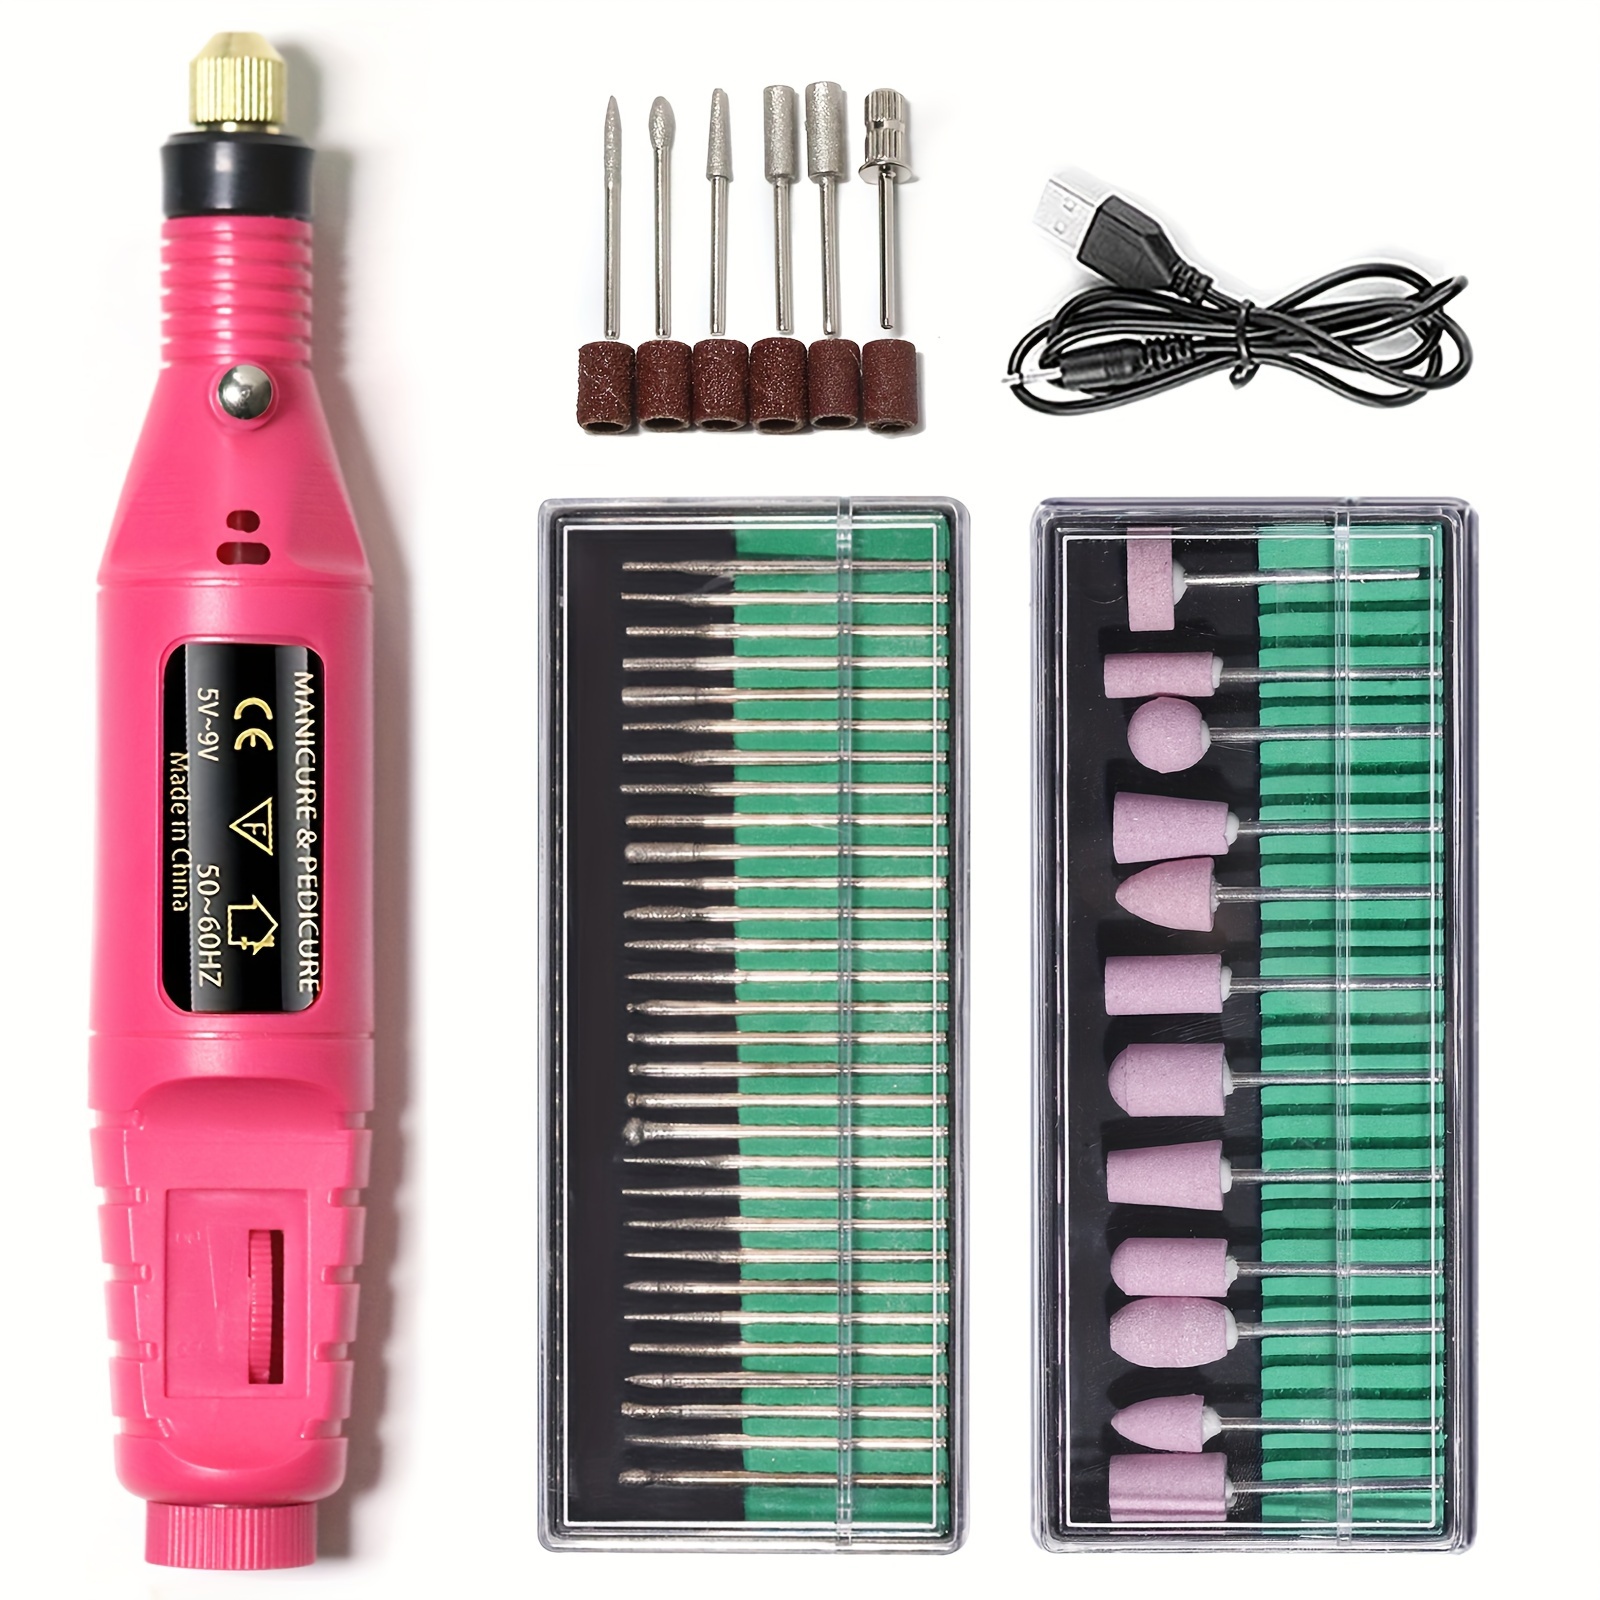 

Electric Nail Drill Set With Variety Bits, High-power Manicure & Pedicure Kit, Usb Rechargeable Nail Art Equipment For Salon-quality Results - Pink